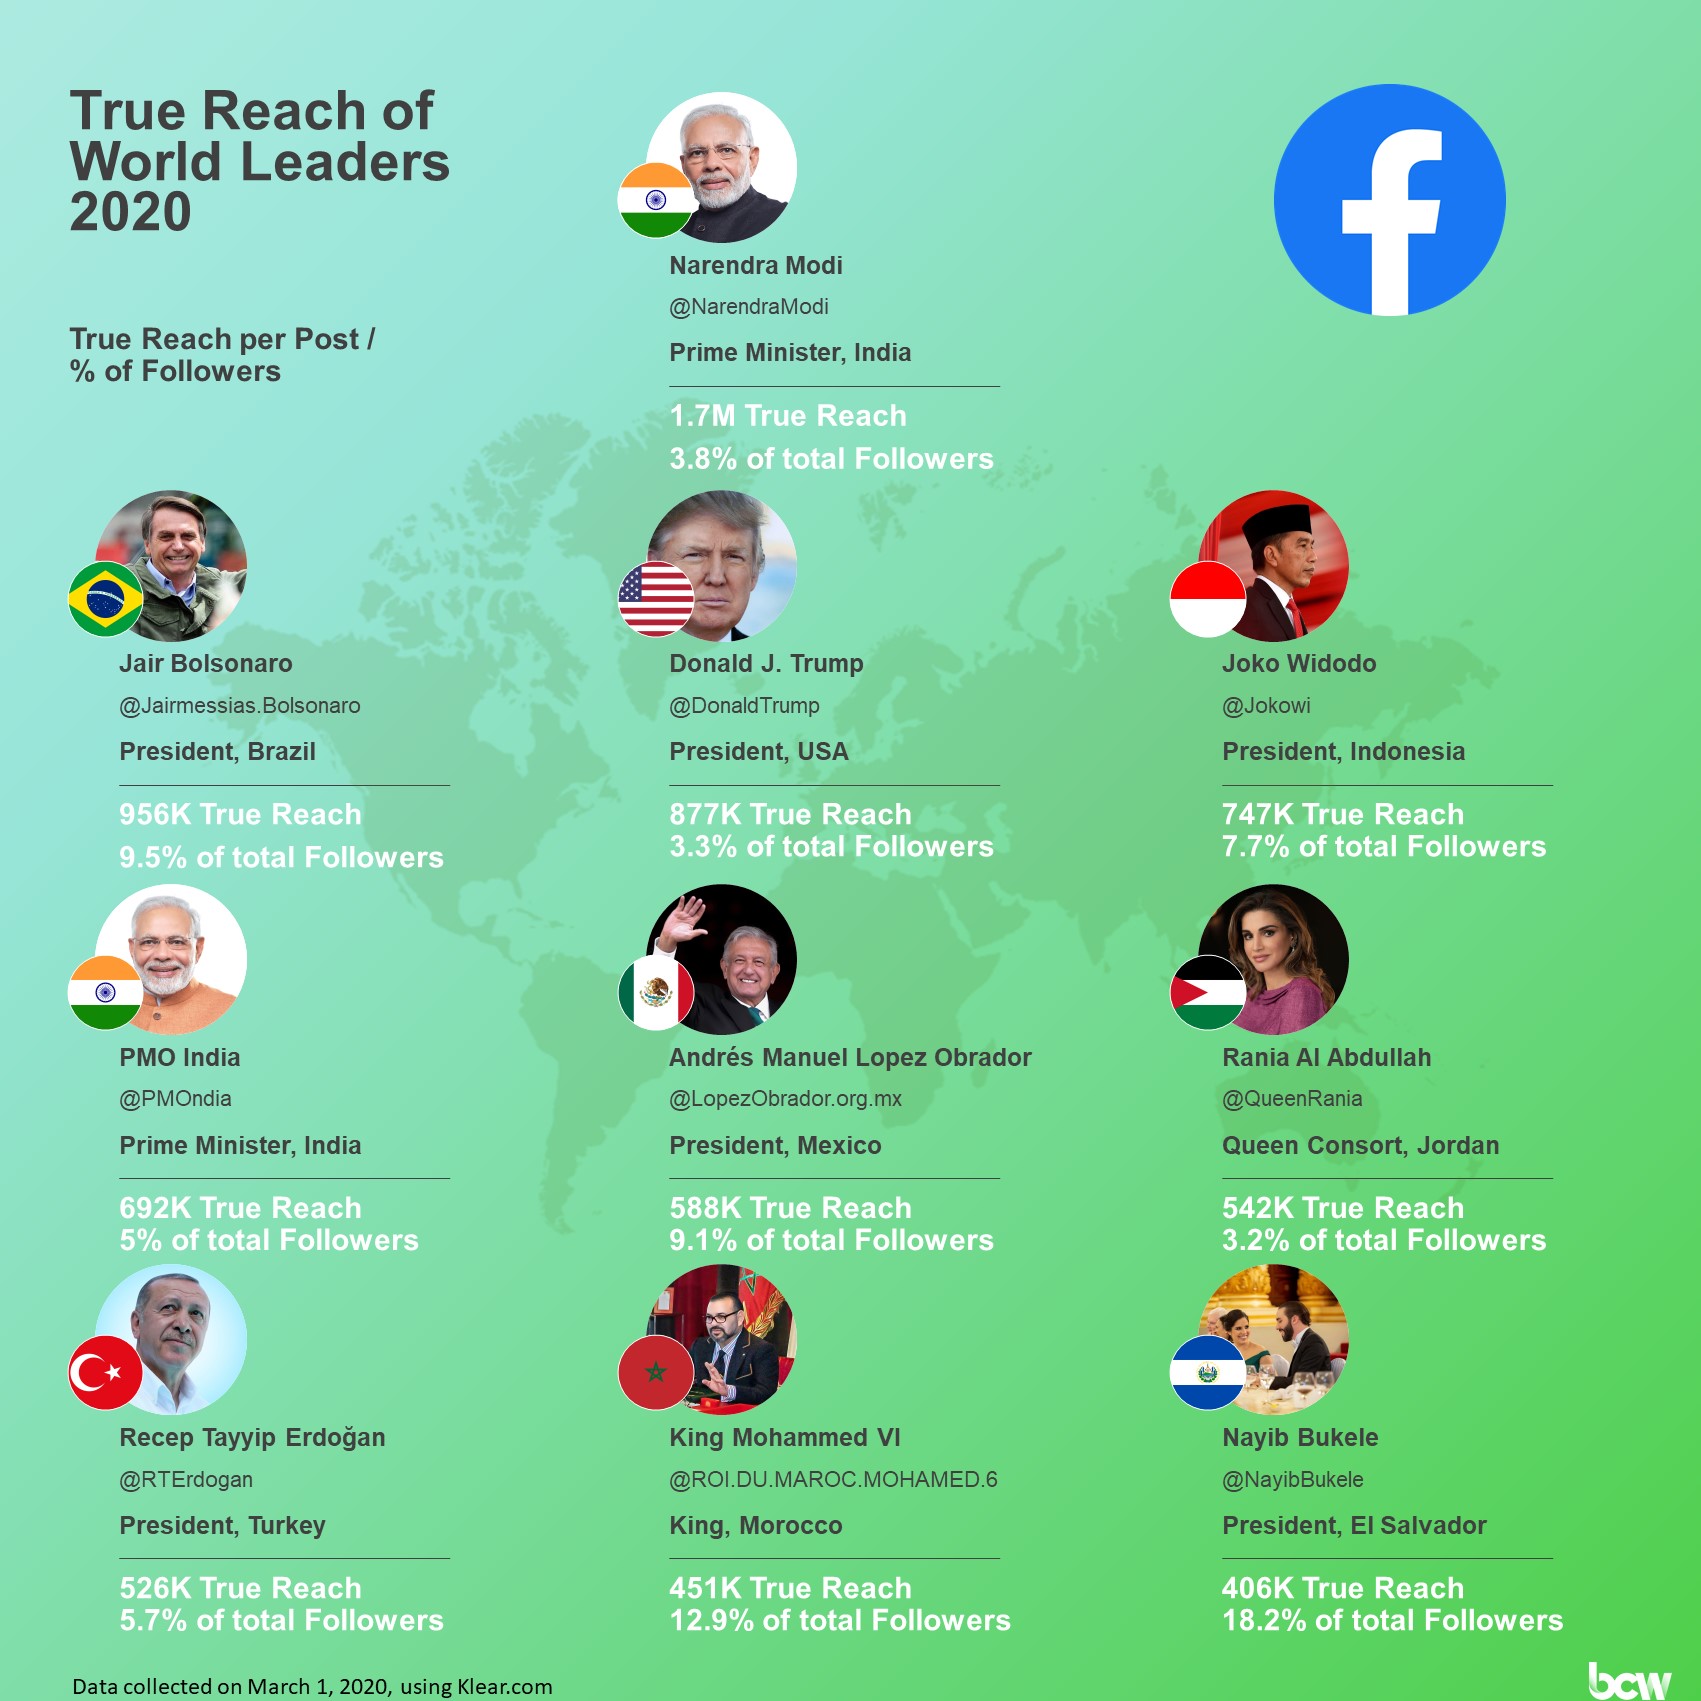 Twiplomacy #DigitalDiplomacy on Twitter: "Who are the Sub-Saharan African leaders on #Facebook ? ➡️Read the latest #Twiplomacy 🔗https://t.co/DgUWg5CLzH #DigitalDiplomacy #FacebookDiplomacy https://t.co/bcYMKAT2TU" / Twitter